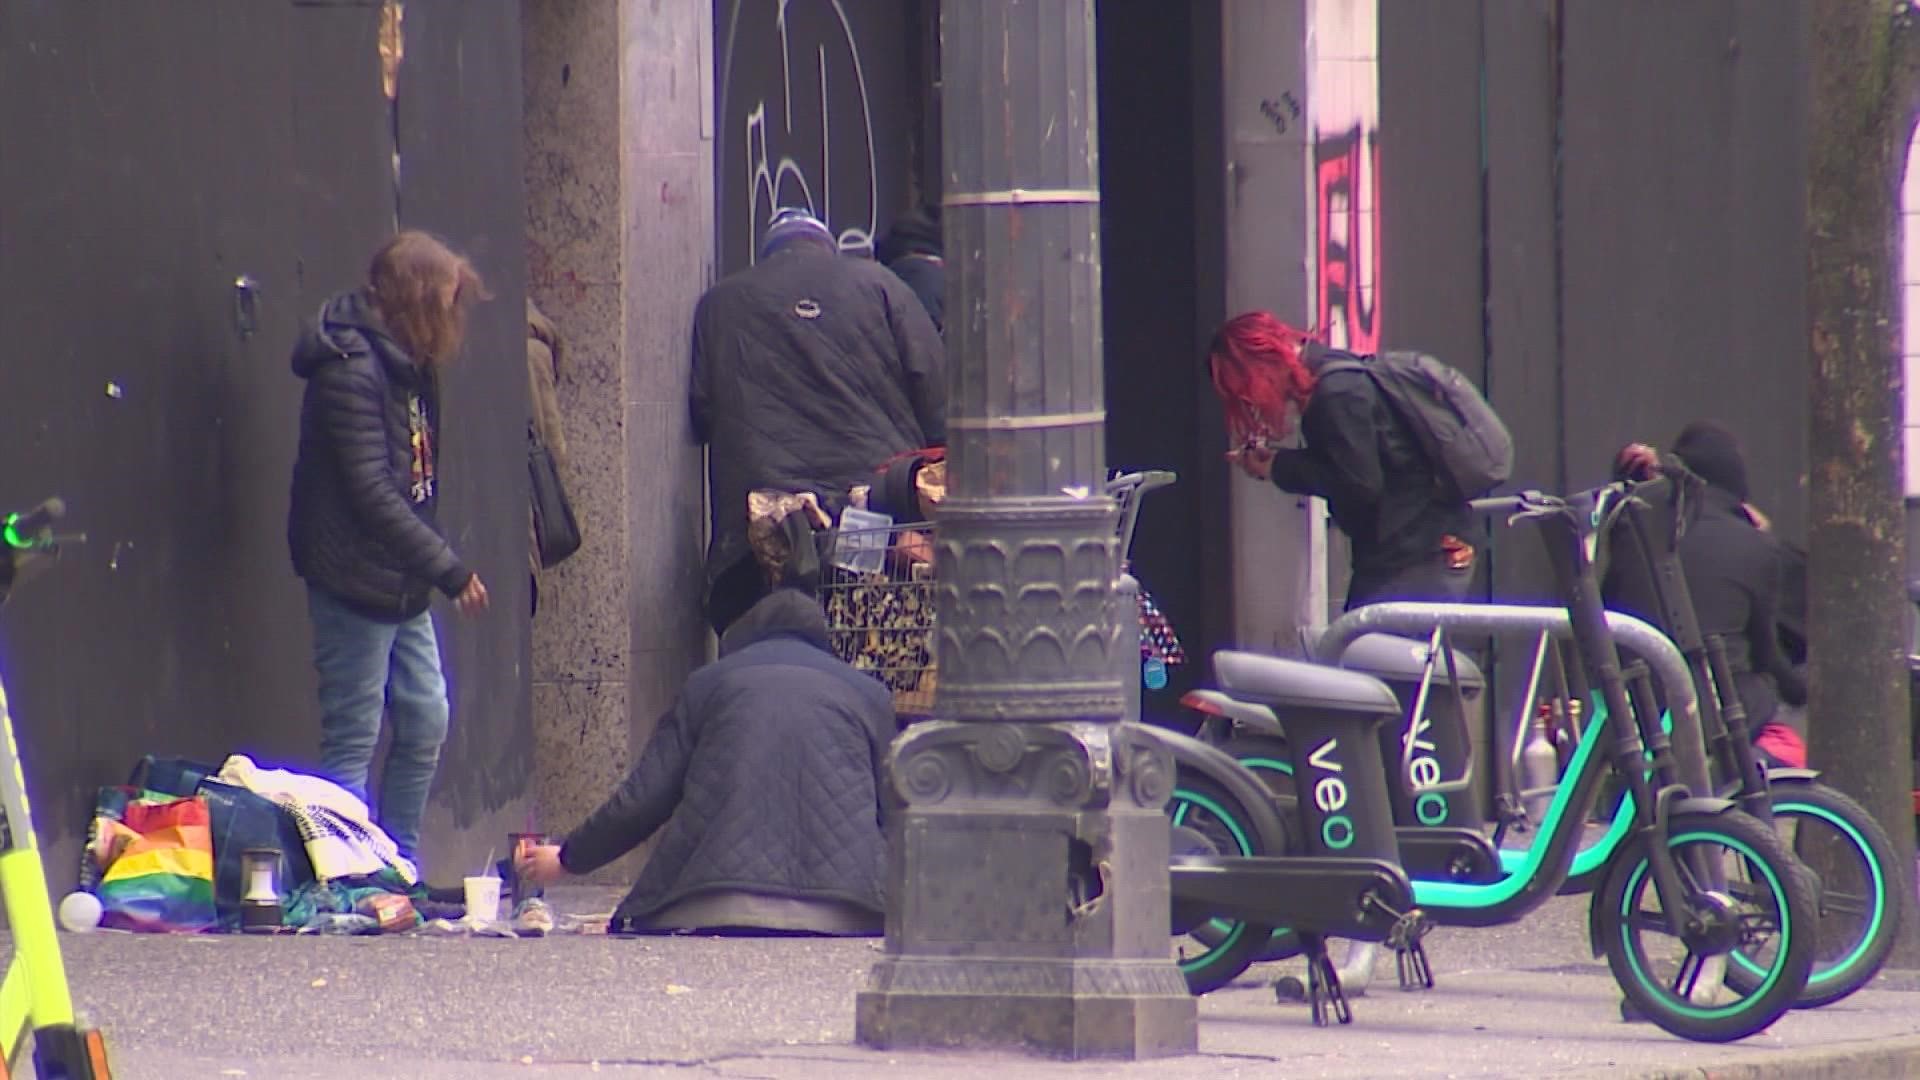 The public-private partnership is aiming to shelter all currently homeless individuals in downtown Seattle in as fast as the next 12 months.